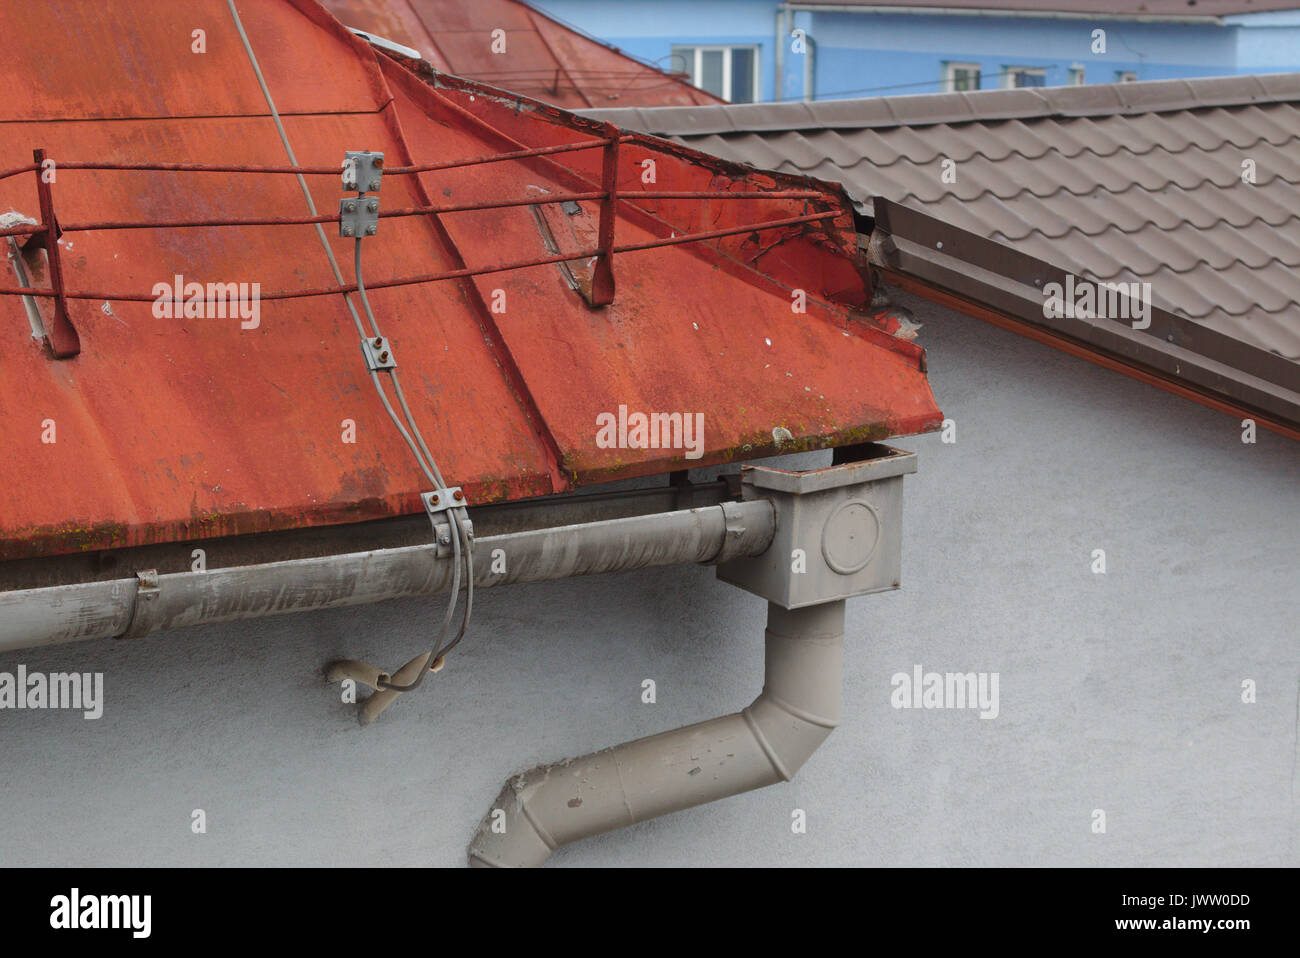 Rusty metal roof with gutter and lightning conductor Stock Photo